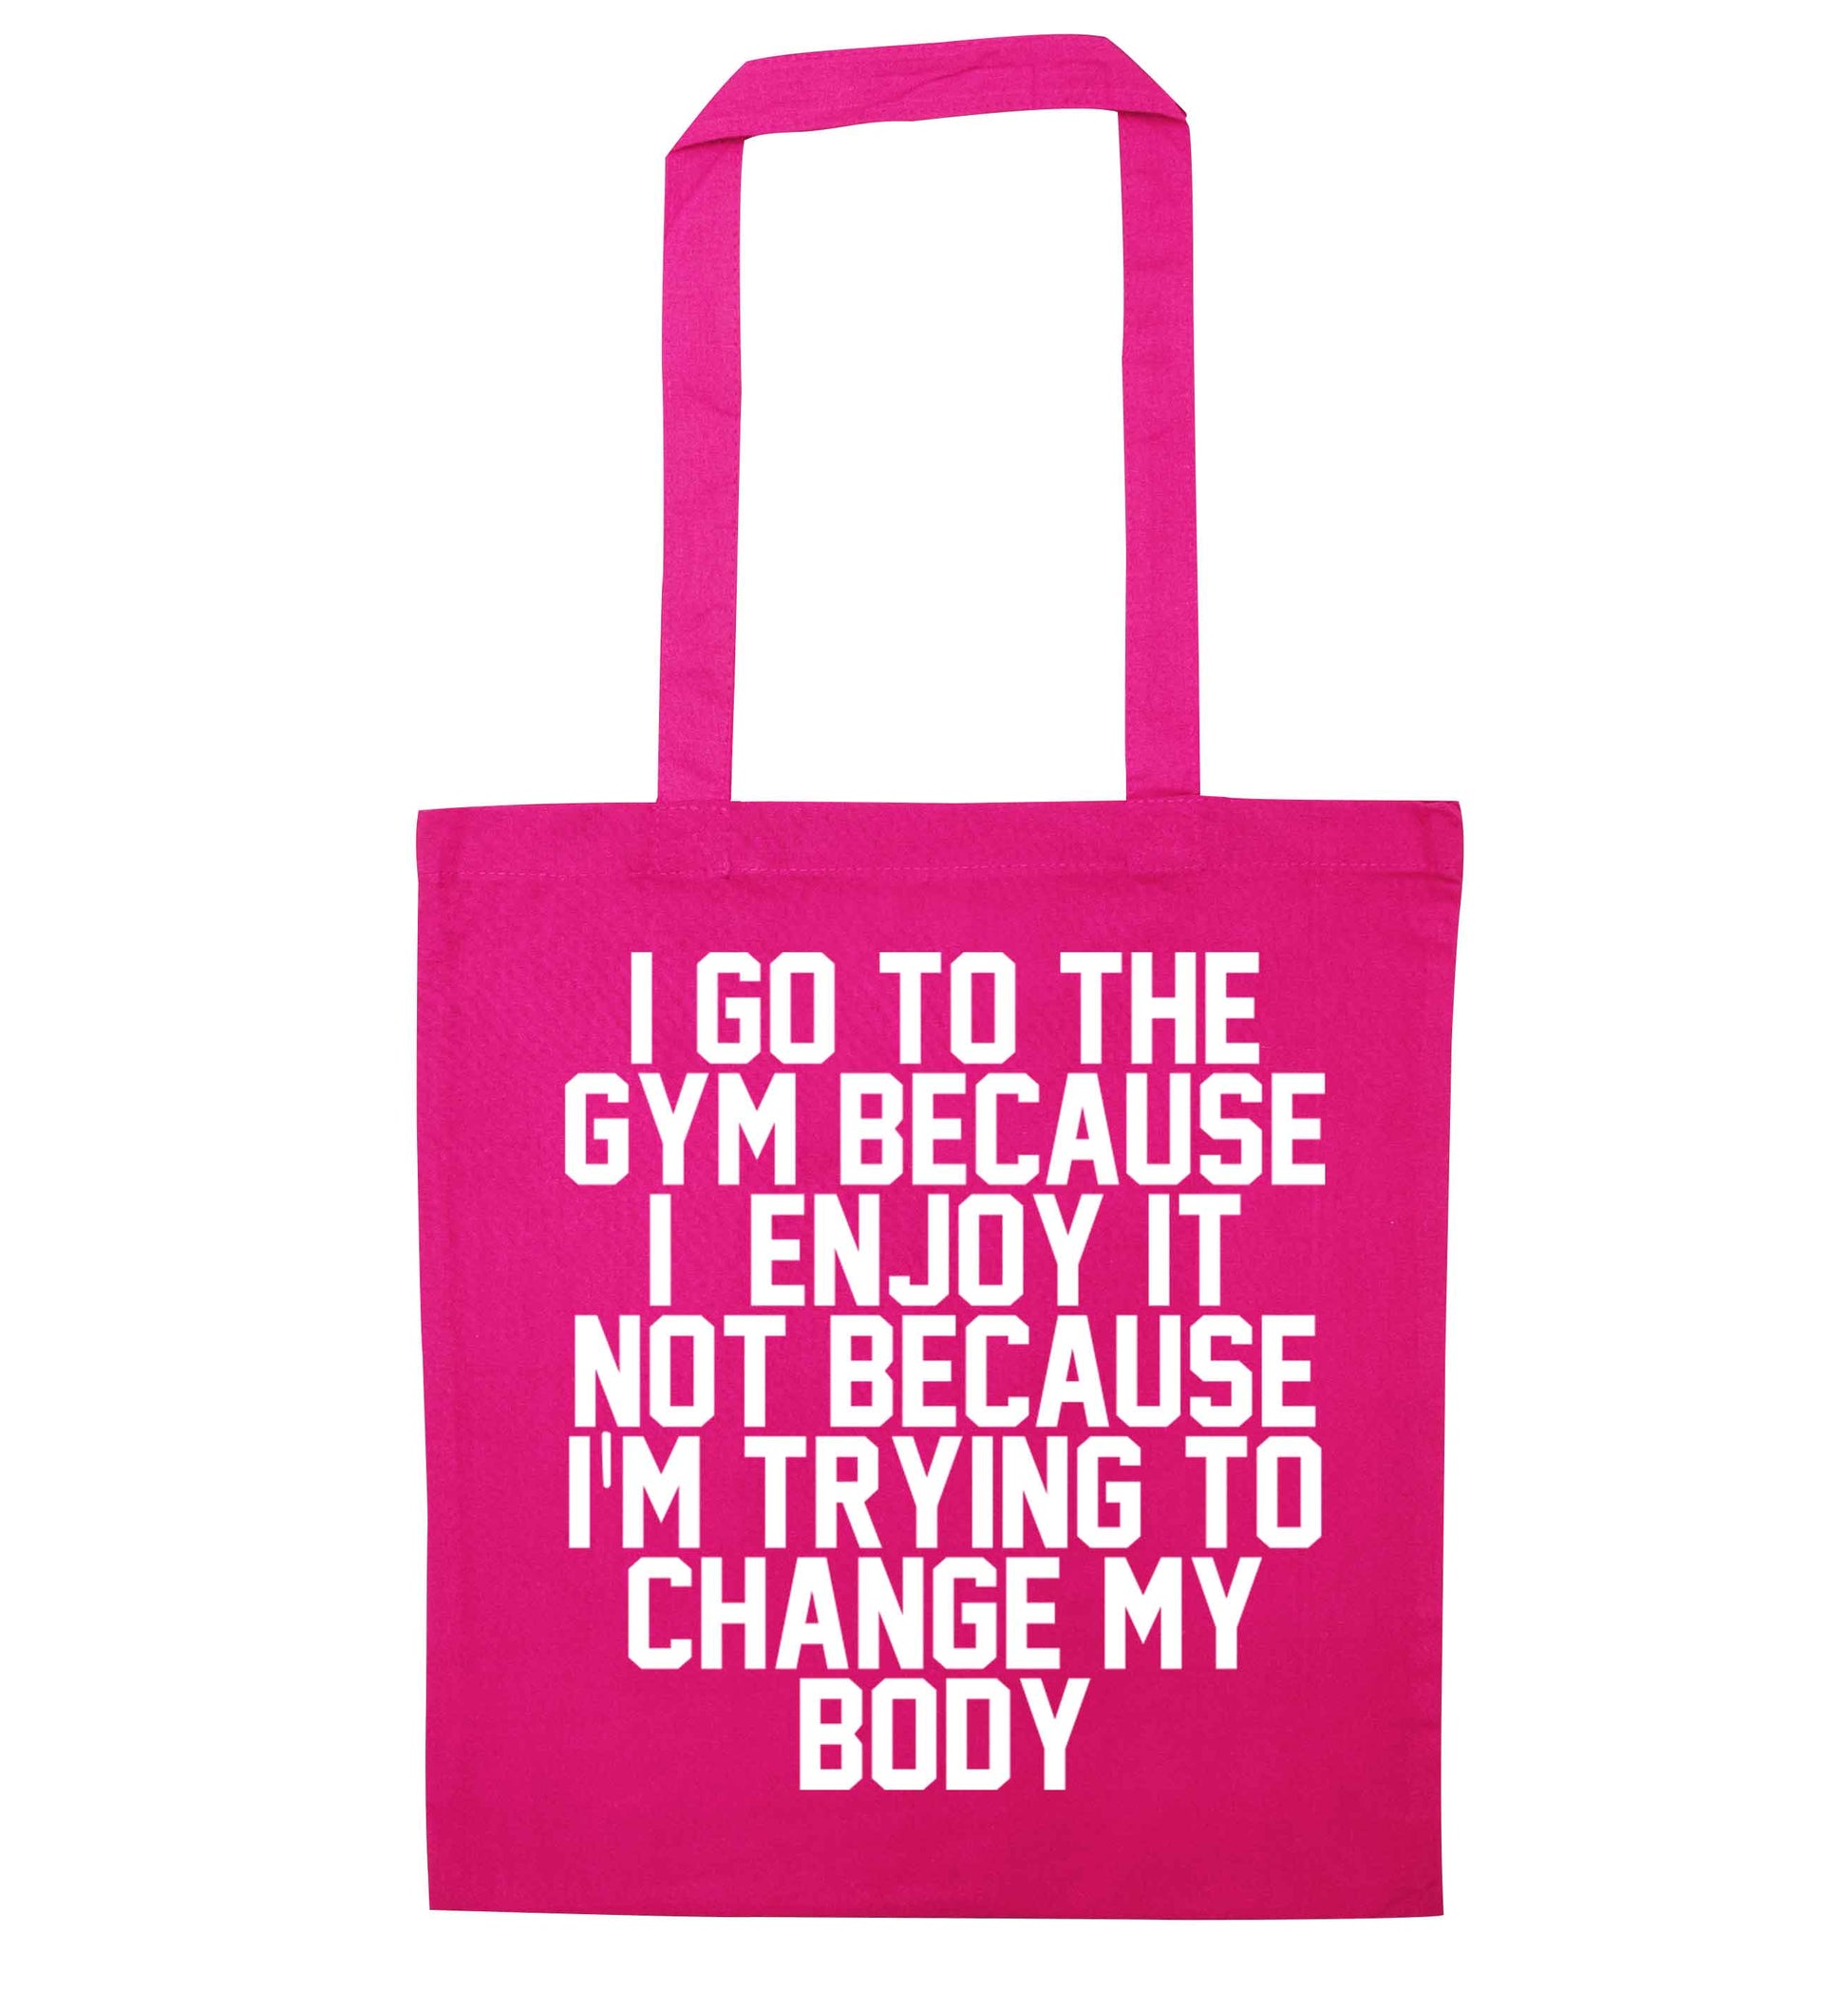 I go to the gym because I enjoy it not because I'm trying to change my body pink tote bag